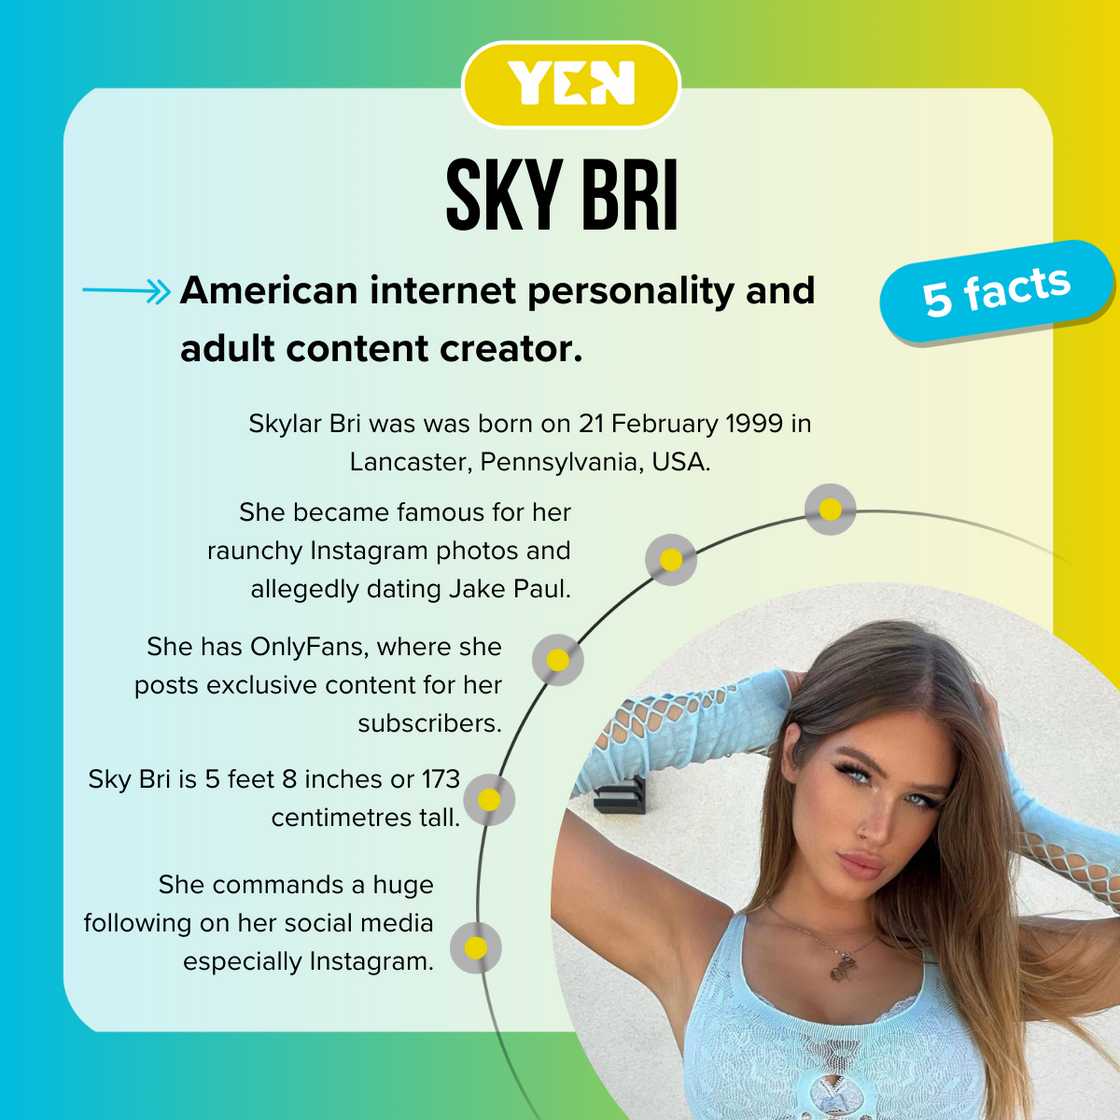 Top facts about Sky Bri.